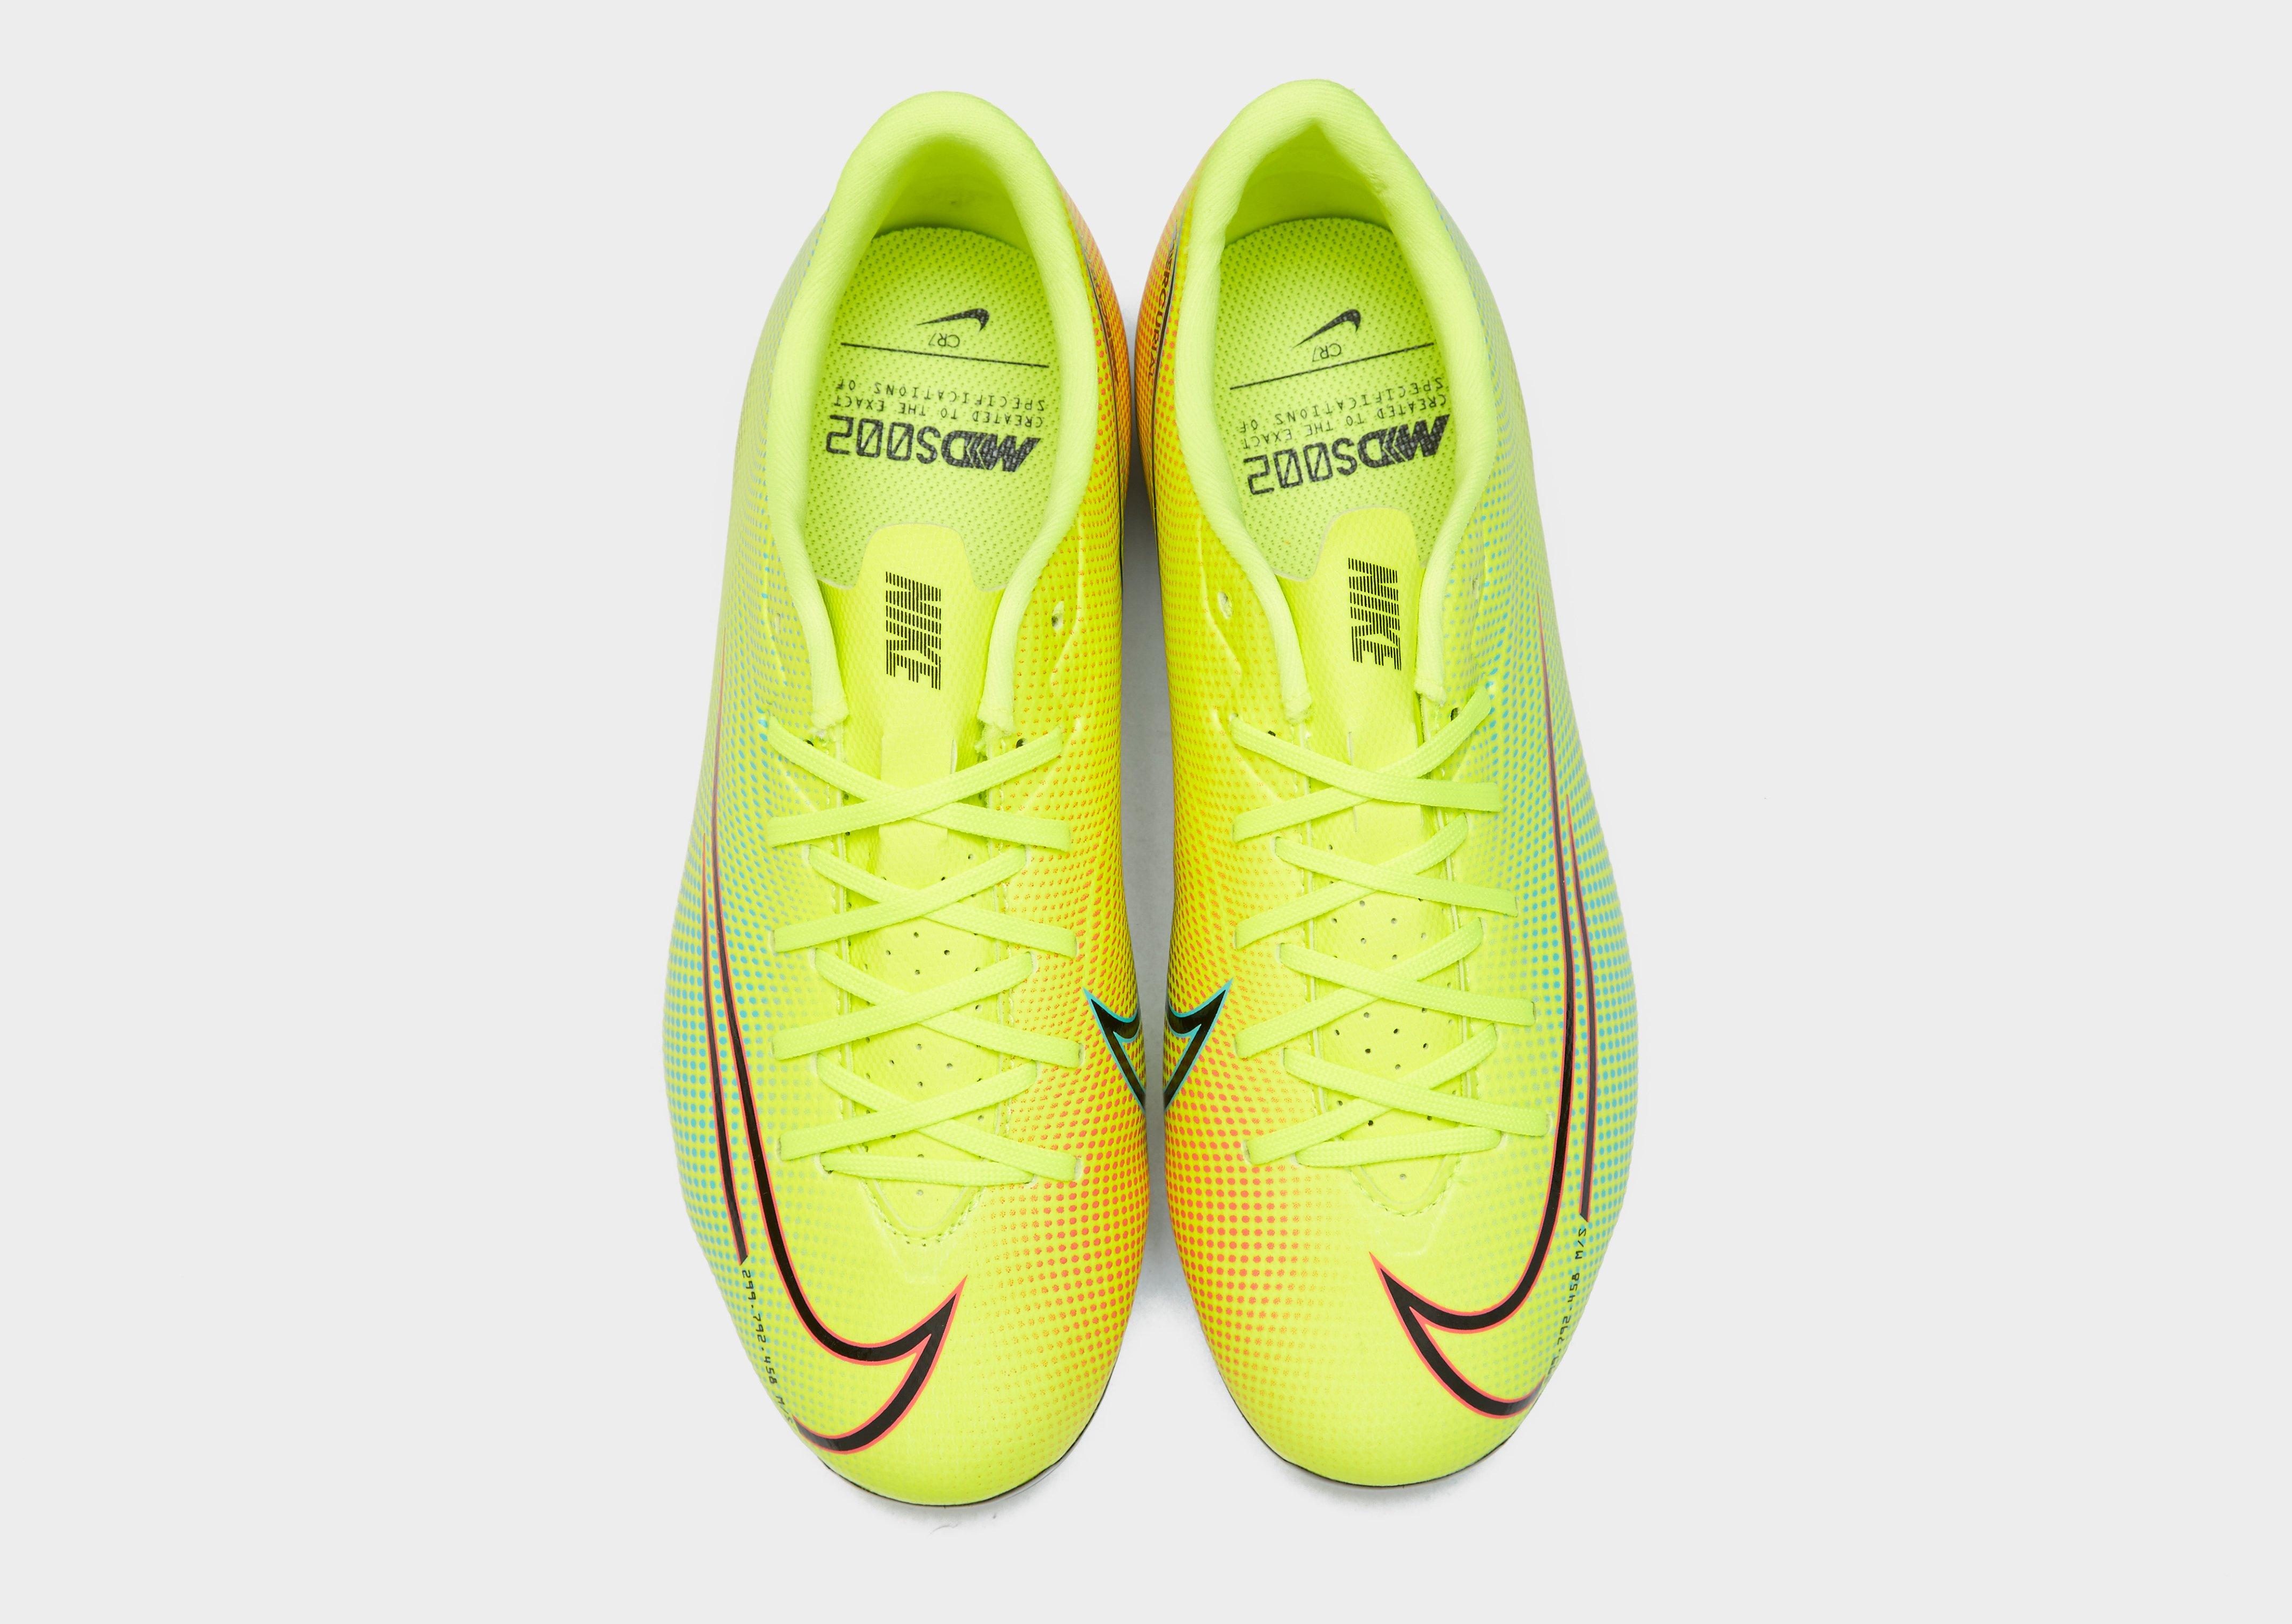 Nike Dream Speed Superfly Up Close Soccer Cleats 101